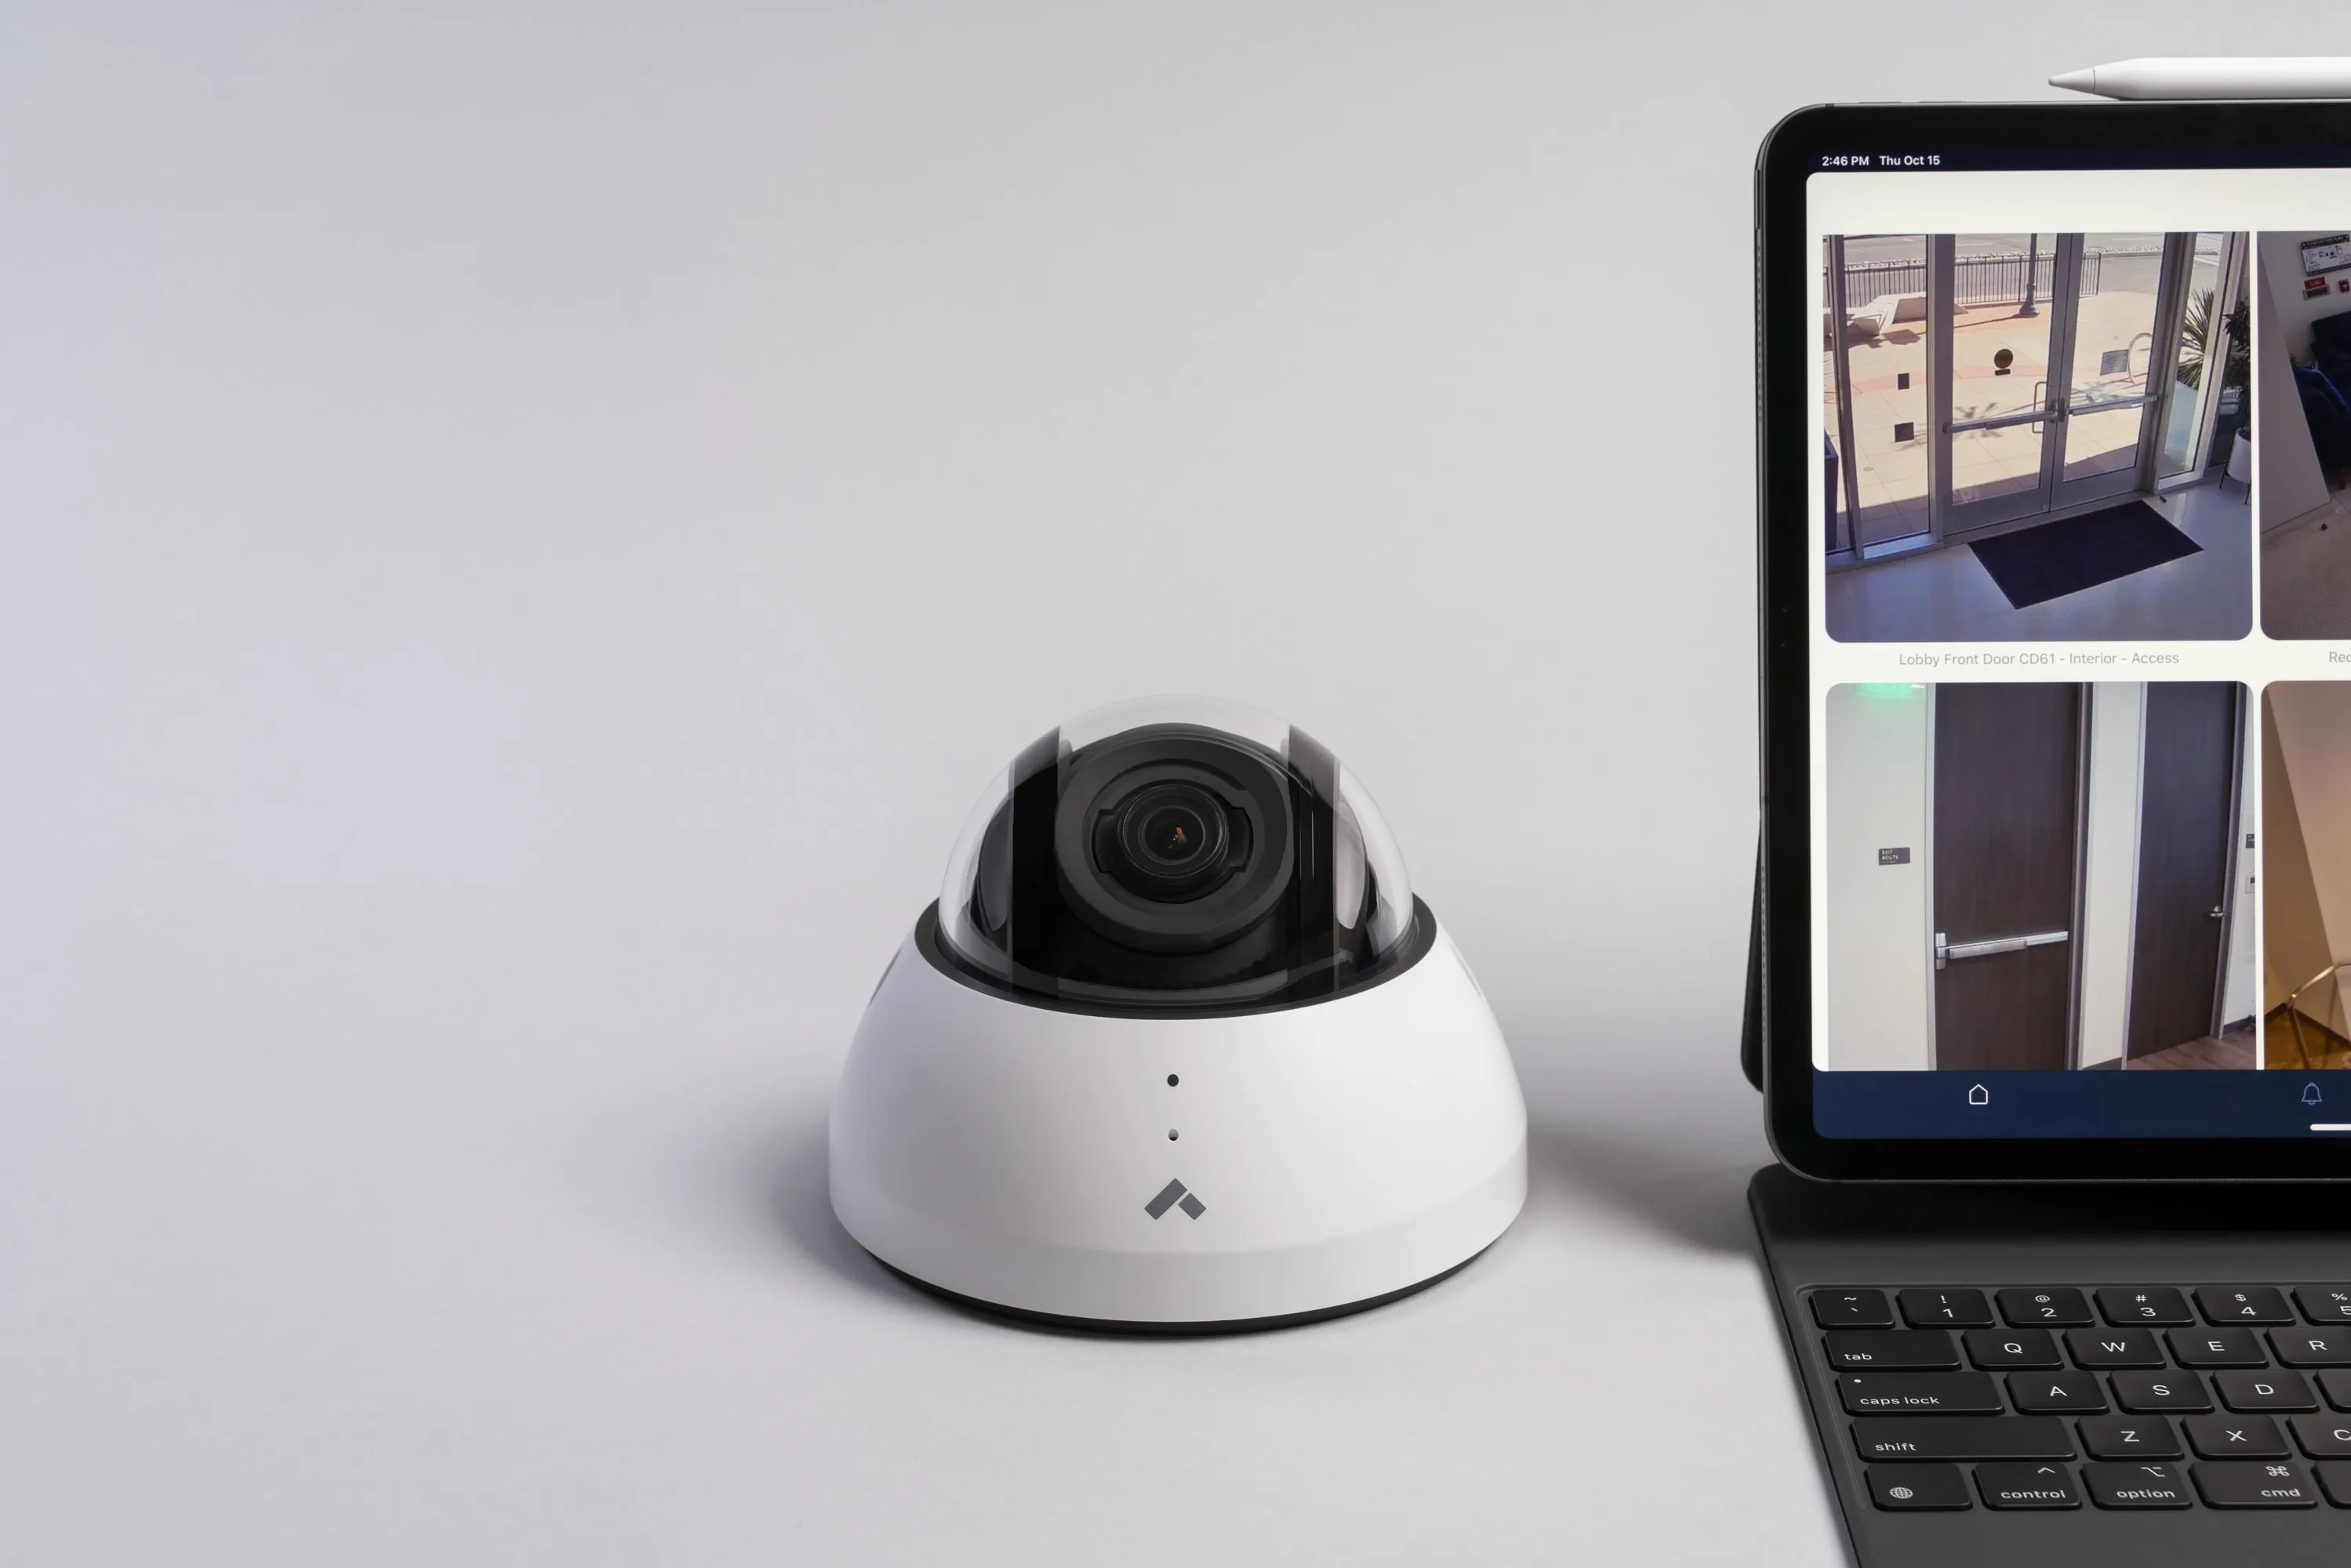 Verkada dome camera alongside laptop showing Command interface for construction security